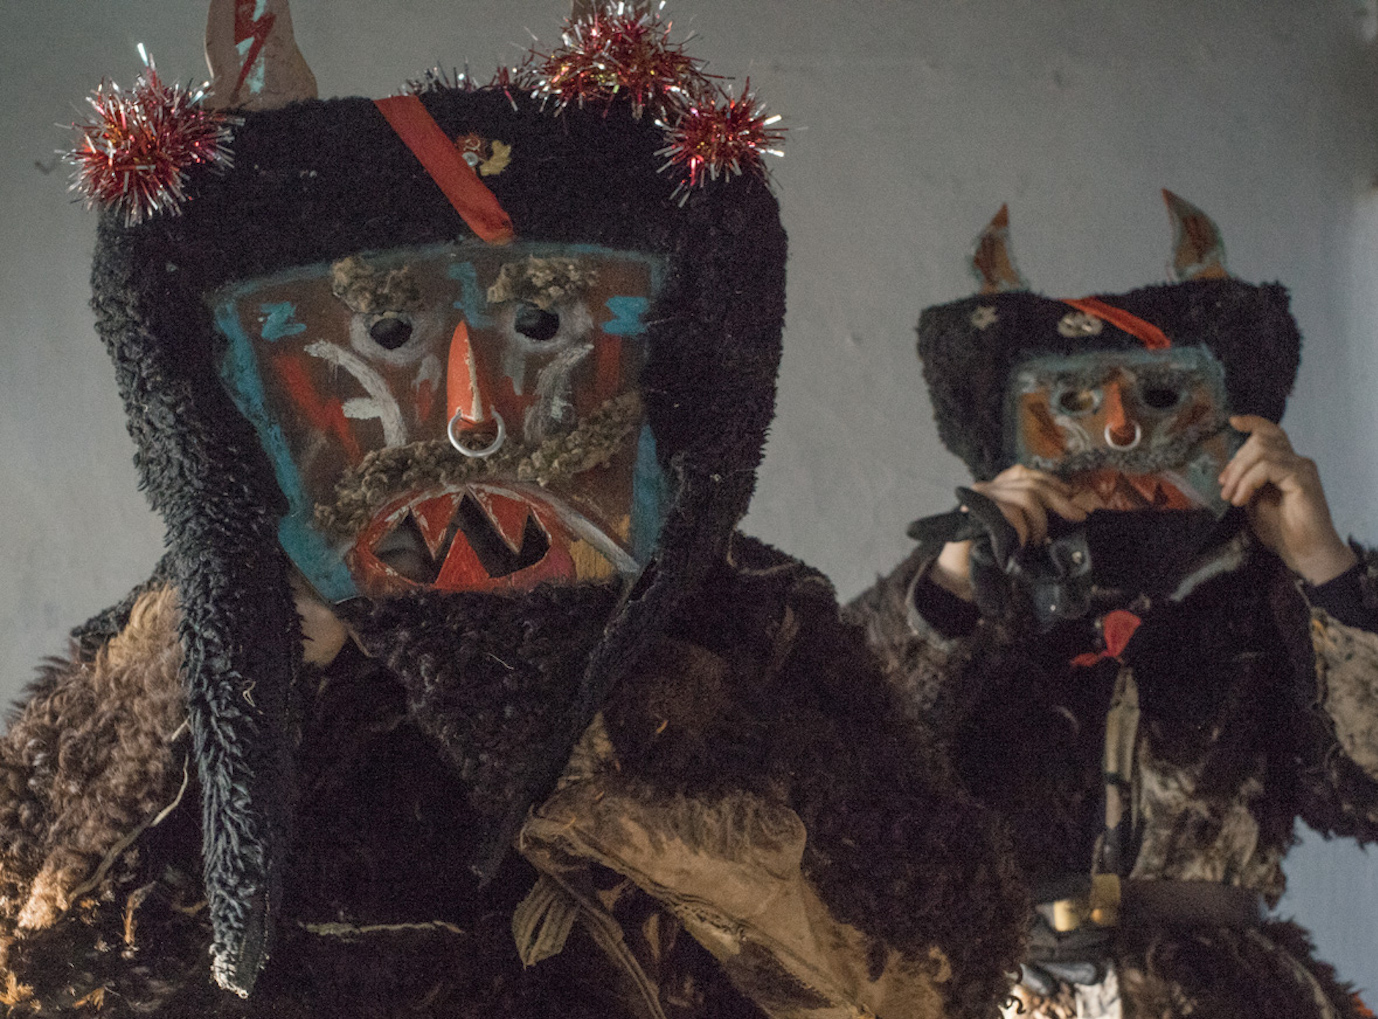 Put your mask on: witness Malanka, the Ukrainian and Moldovan new year tradition that wards off evil